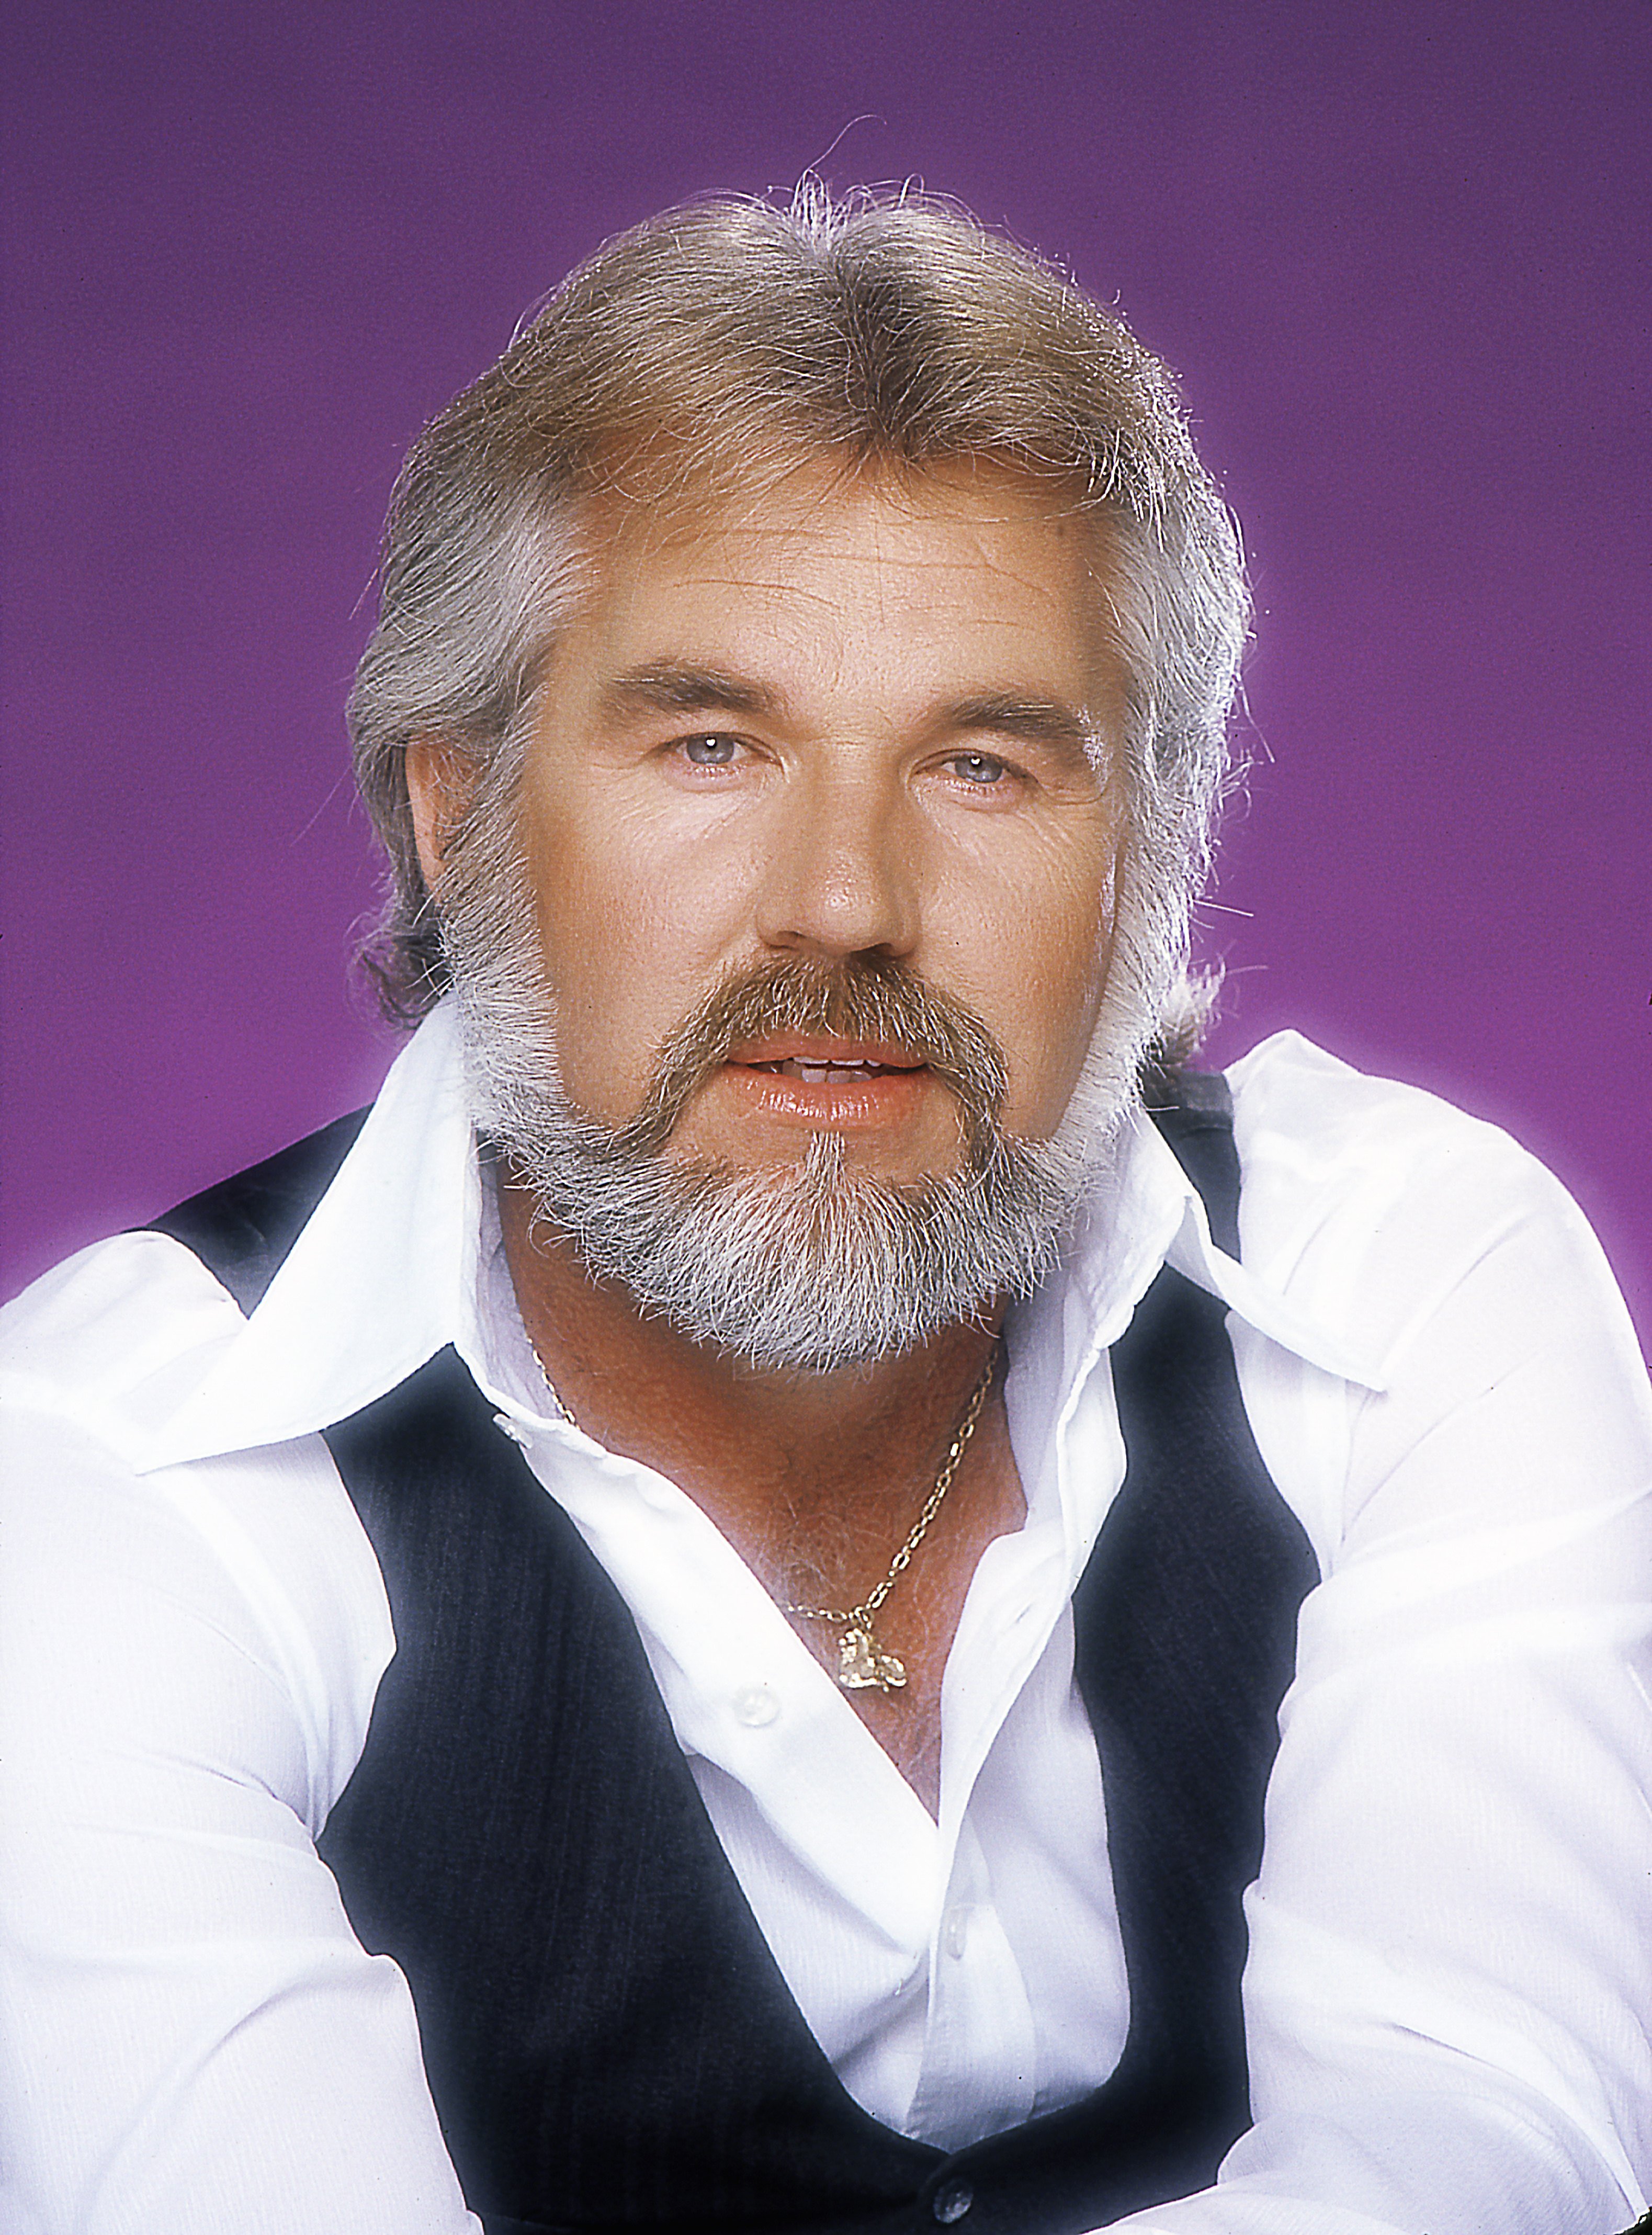 Porträt von Kenny Rogers 1979 in Los Angeles. | Quelle: Getty Images